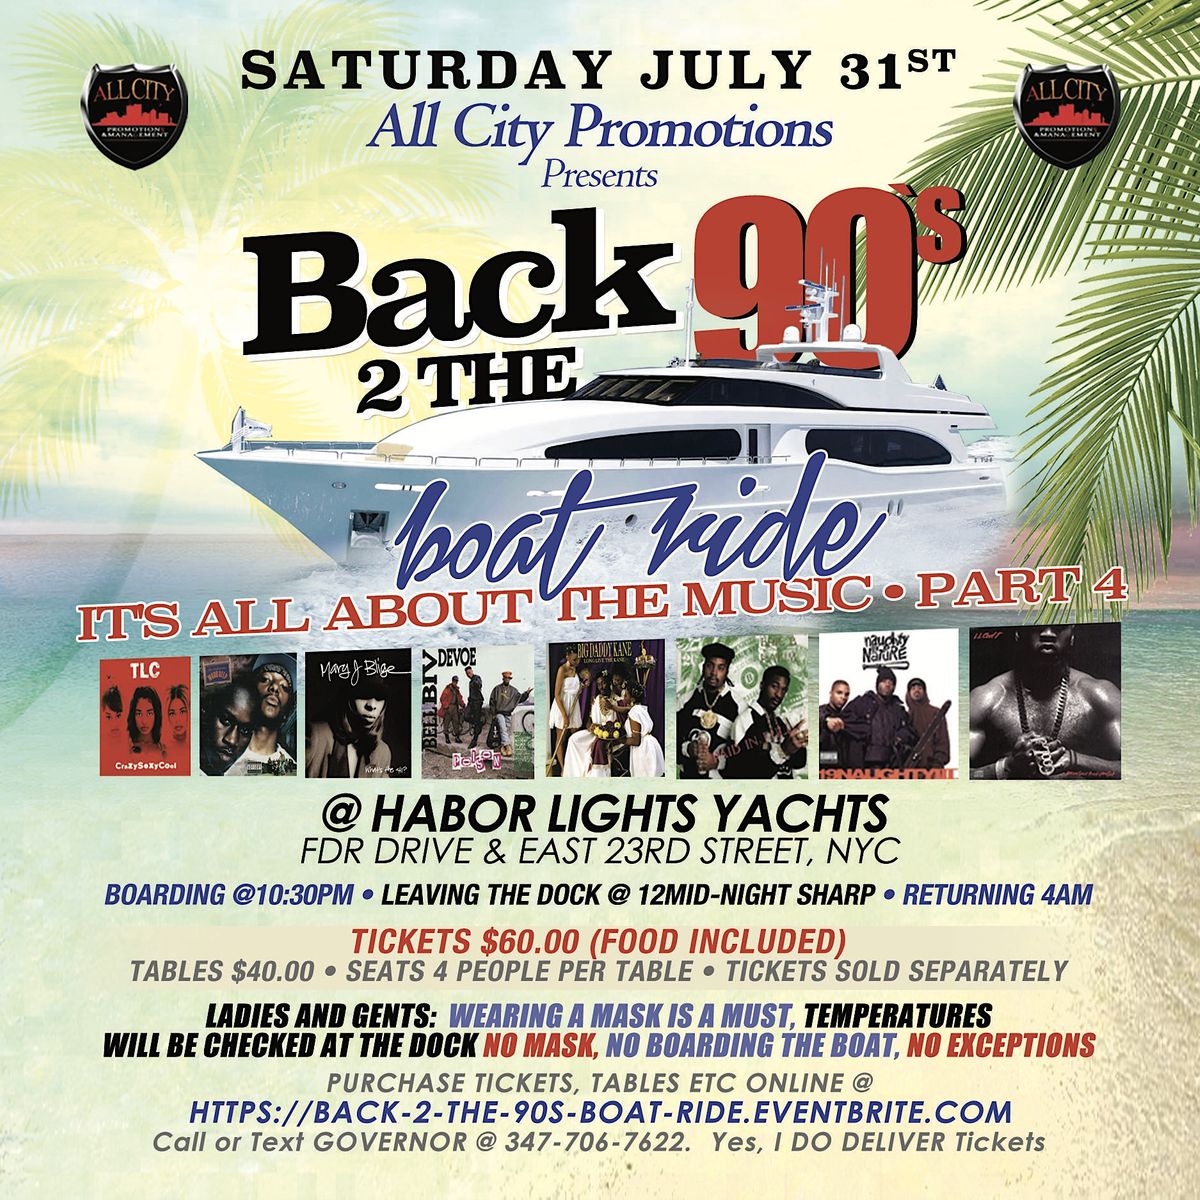 Sat July 27th BACK 2 THE 90'S Mid-Night Boat Ride Pt 8